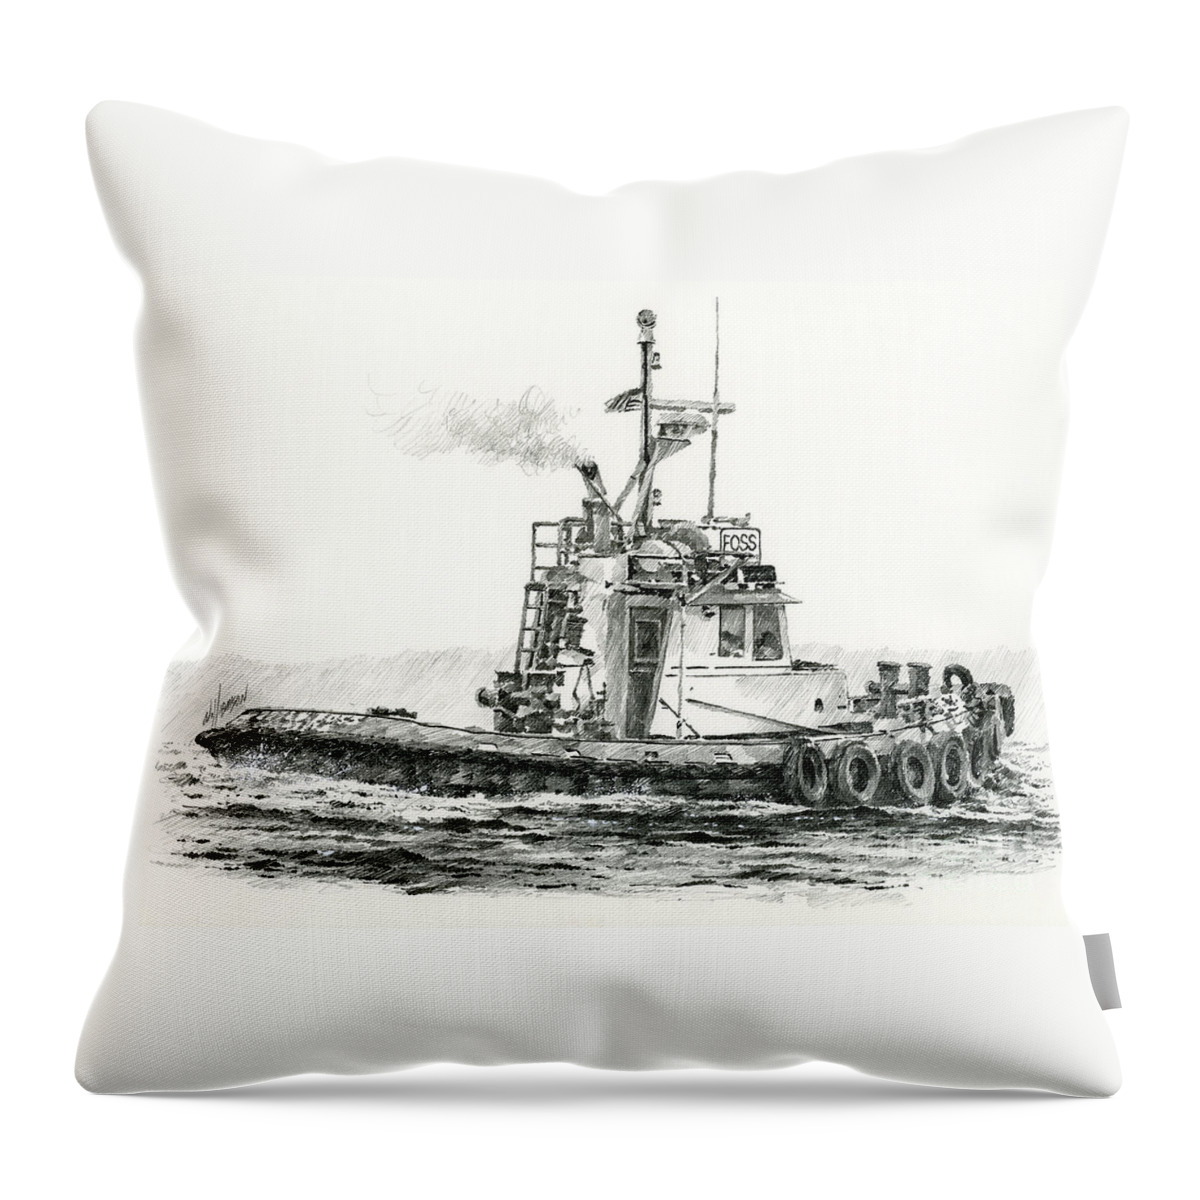  Tugs Throw Pillow featuring the drawing Tugboat KELLY FOSS by James Williamson